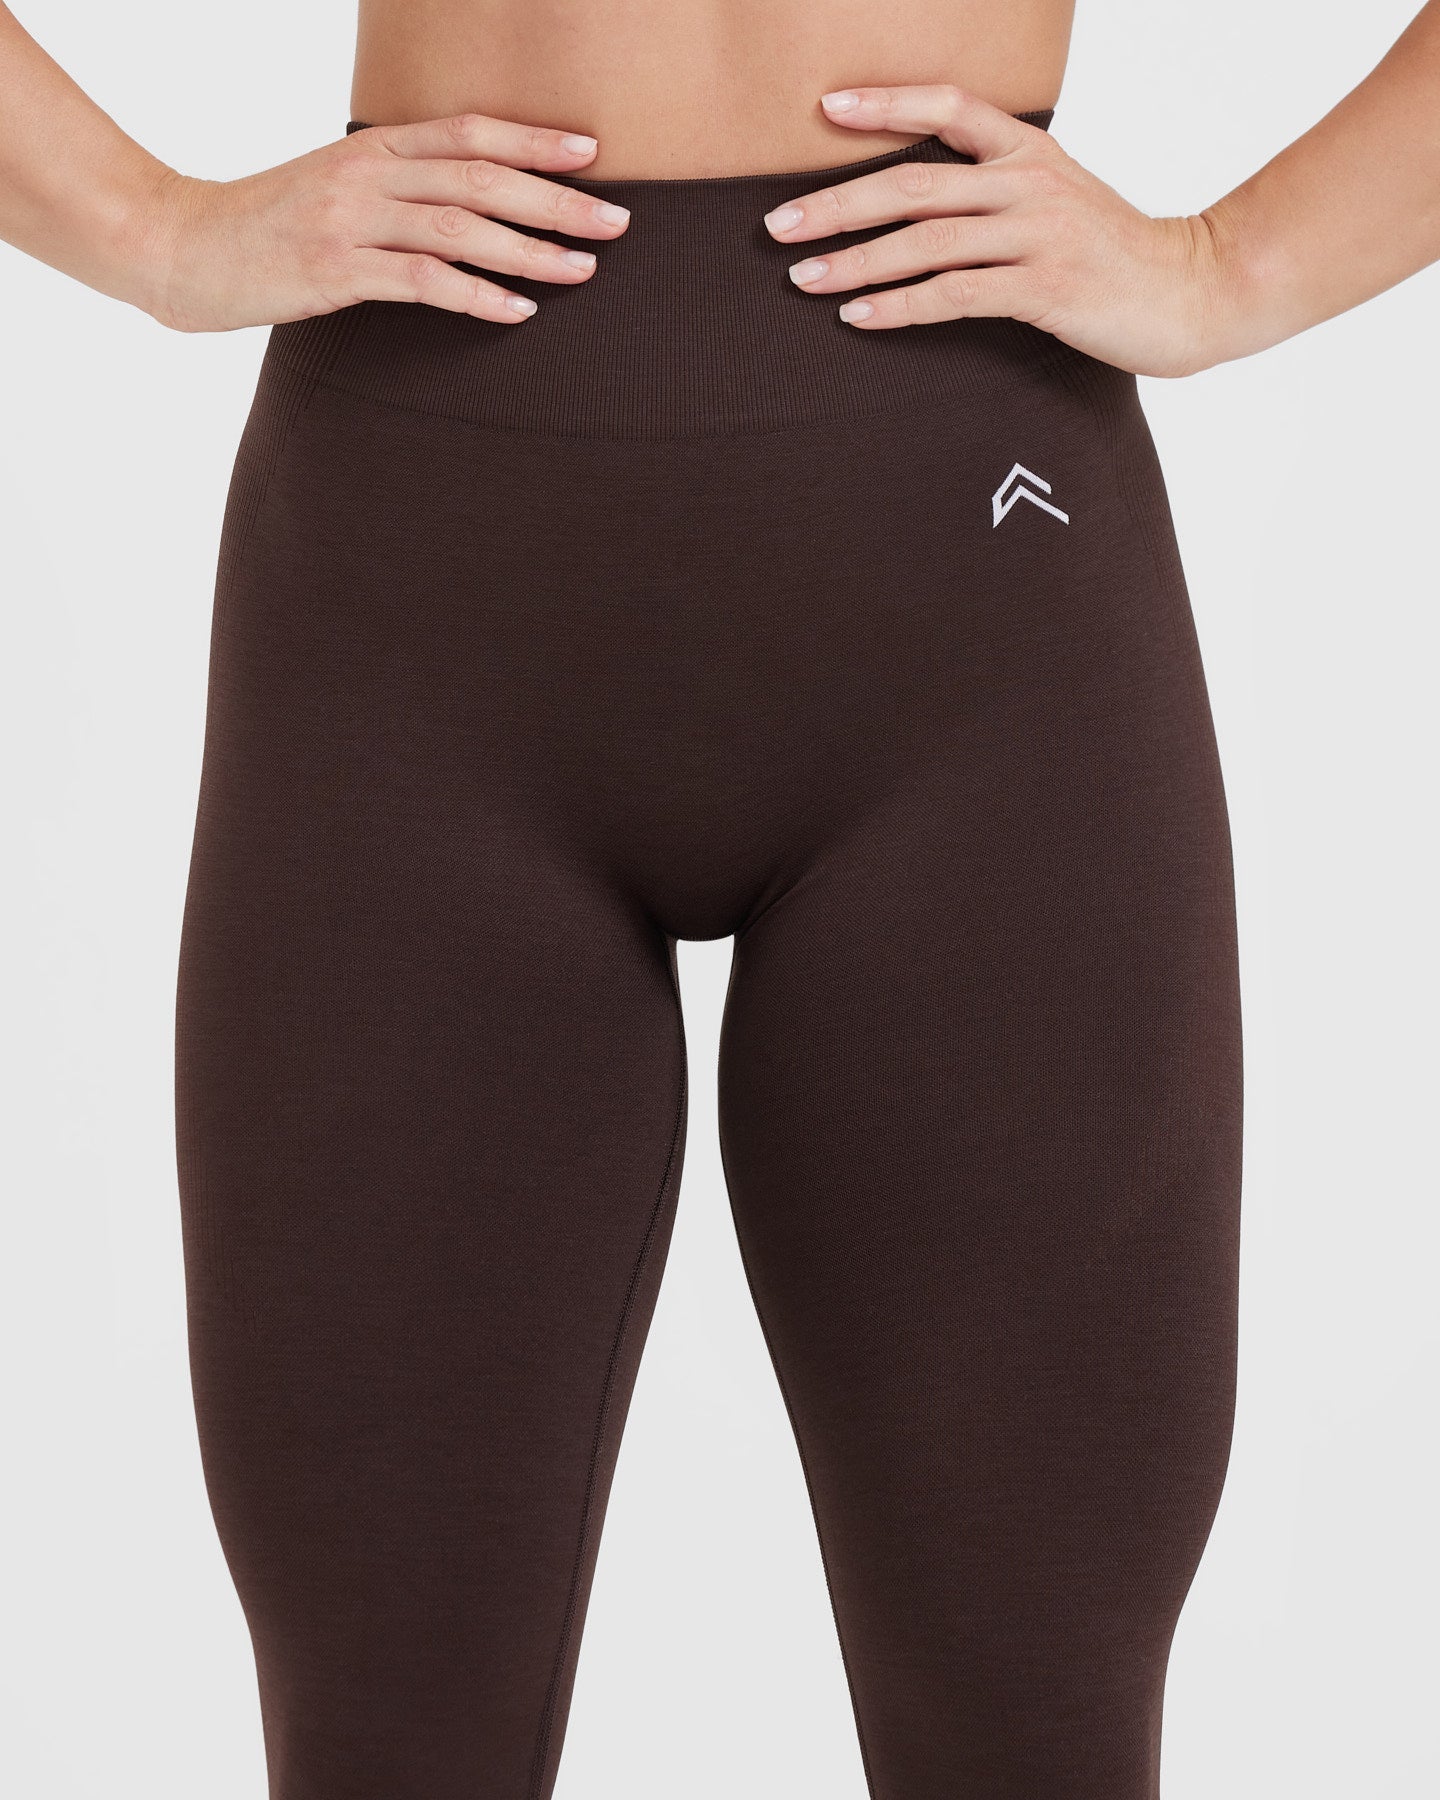 Classic Seamless 2.0 Leggings 70% Cocoa Marl | Oner Active US